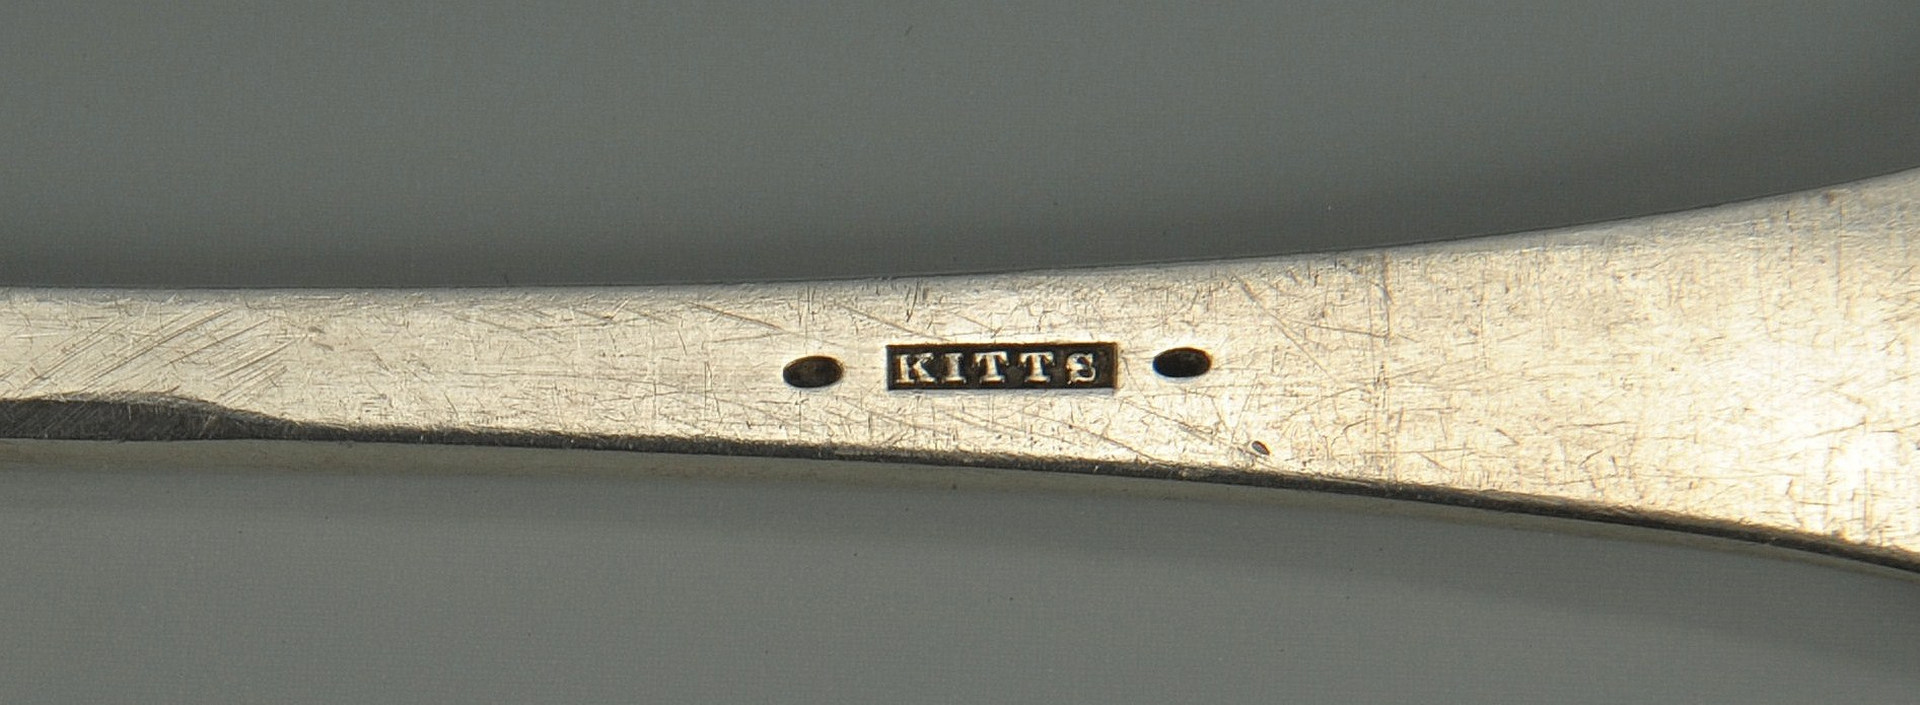 Lot 49: Kentucky Coin Silver Ladle, Kitts